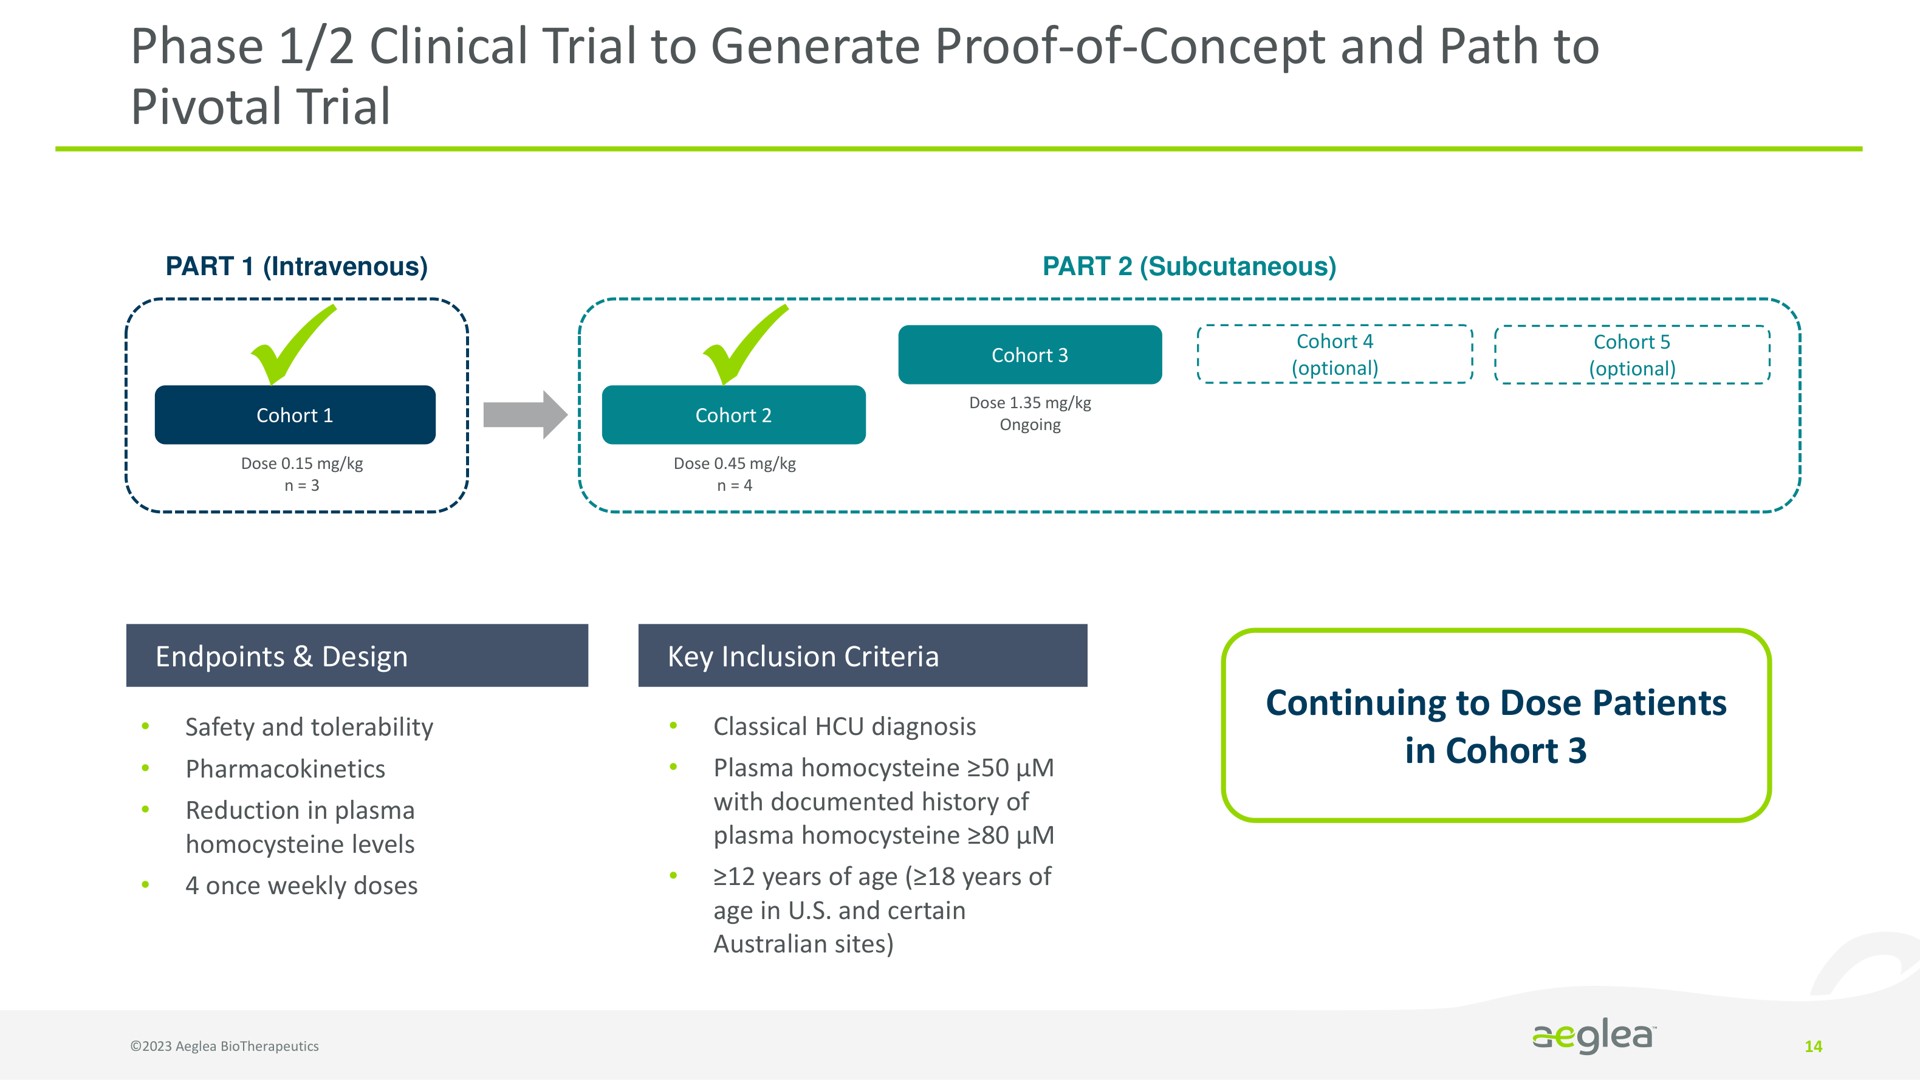 phase clinical trial to generate proof of concept and path to pivotal trial | Aeglea BioTherapeutics